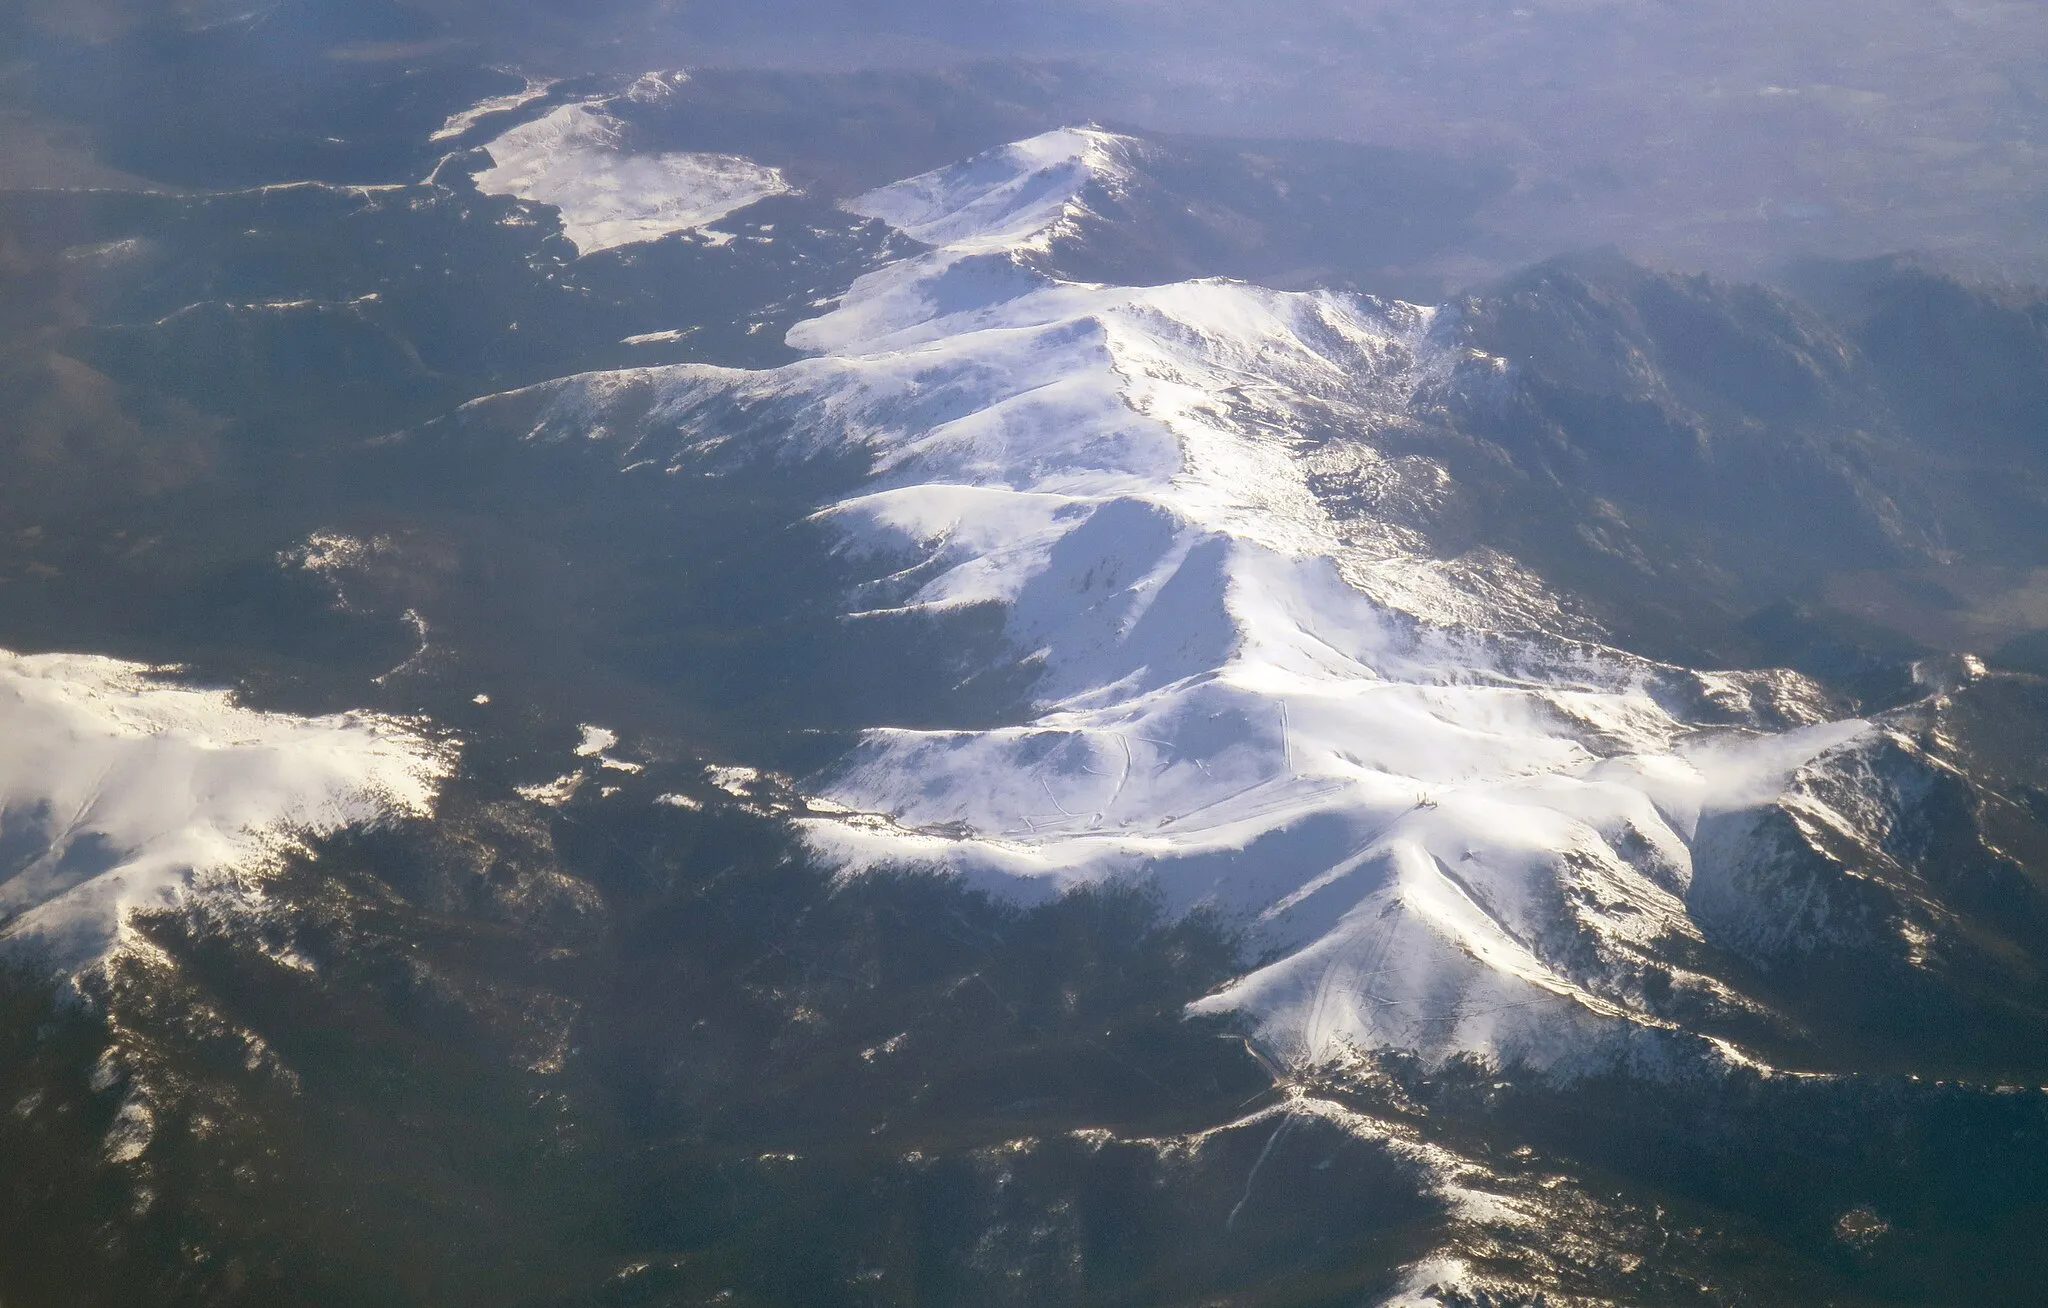 Photo showing: An aerial view of the Cuerda Larga, which is a branch of the Sierra de Guadarrama mountain range near Madrid. The nearest peak is Bola del Mundo.